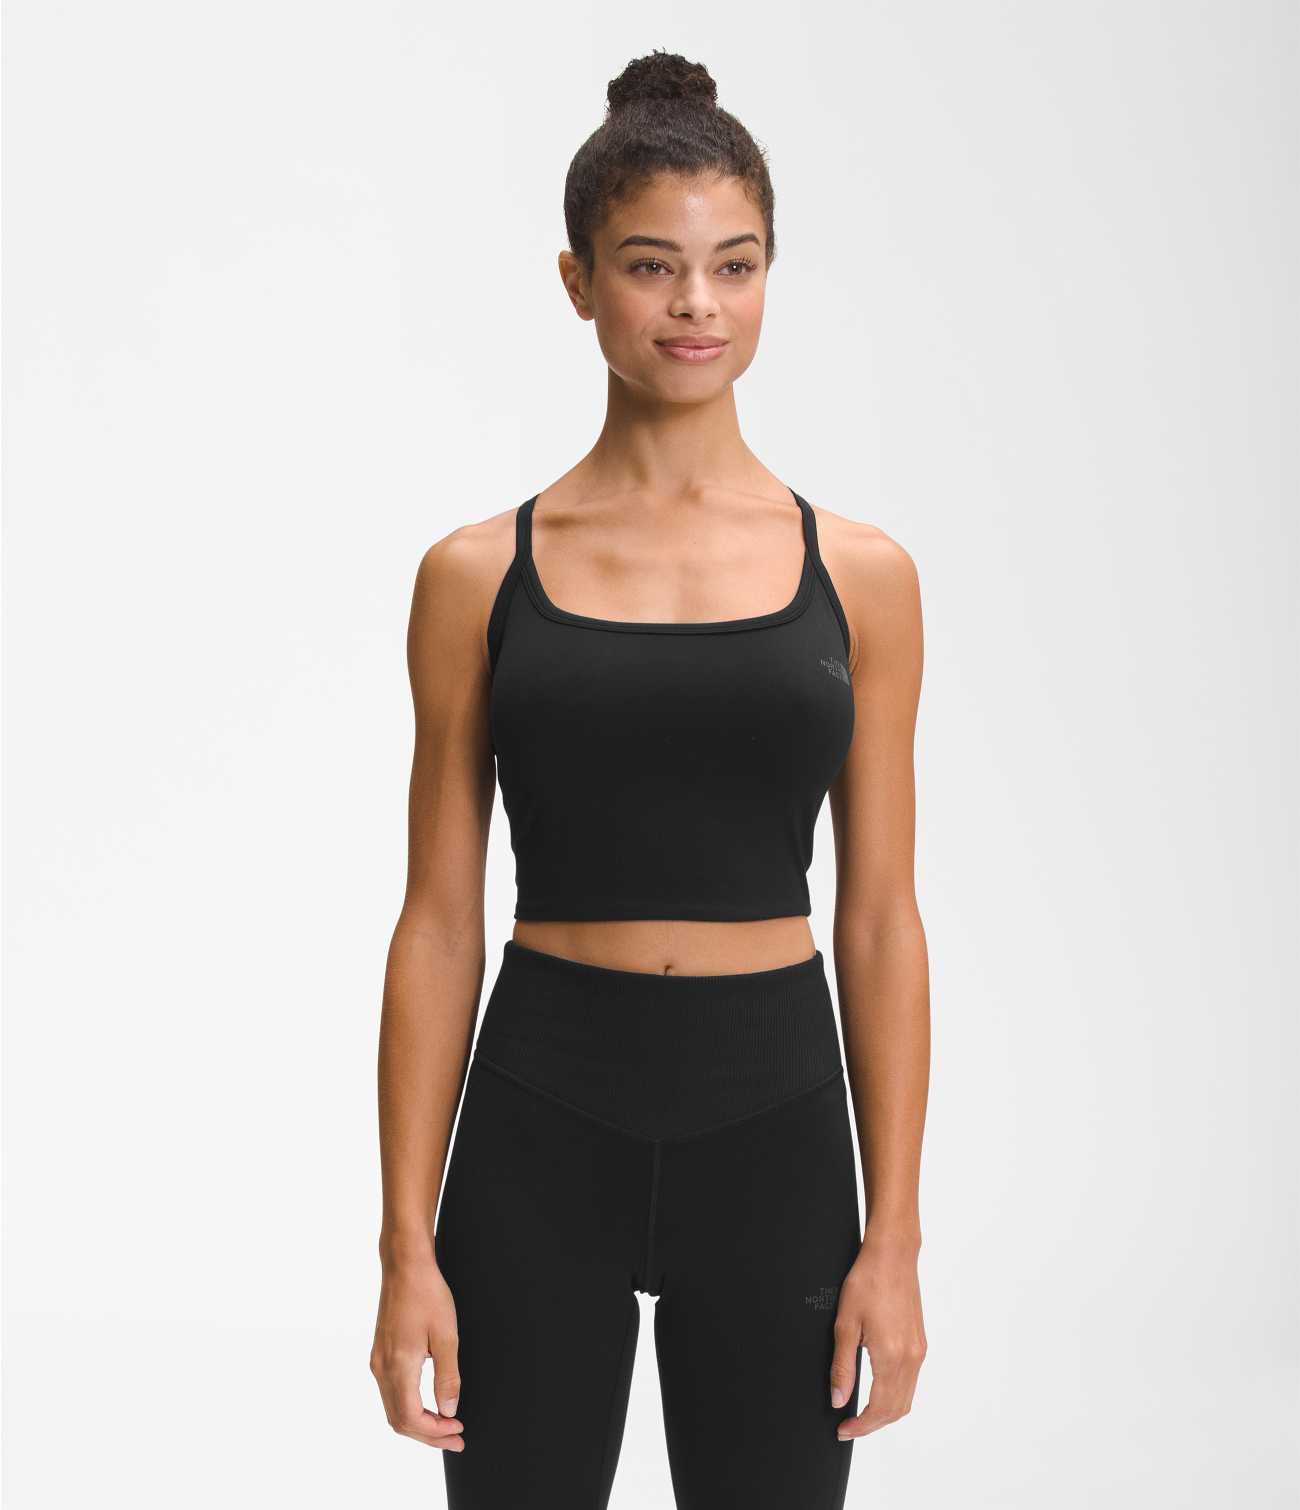 WOMEN'S DUNE SKY DUET TIGHT, The North Face